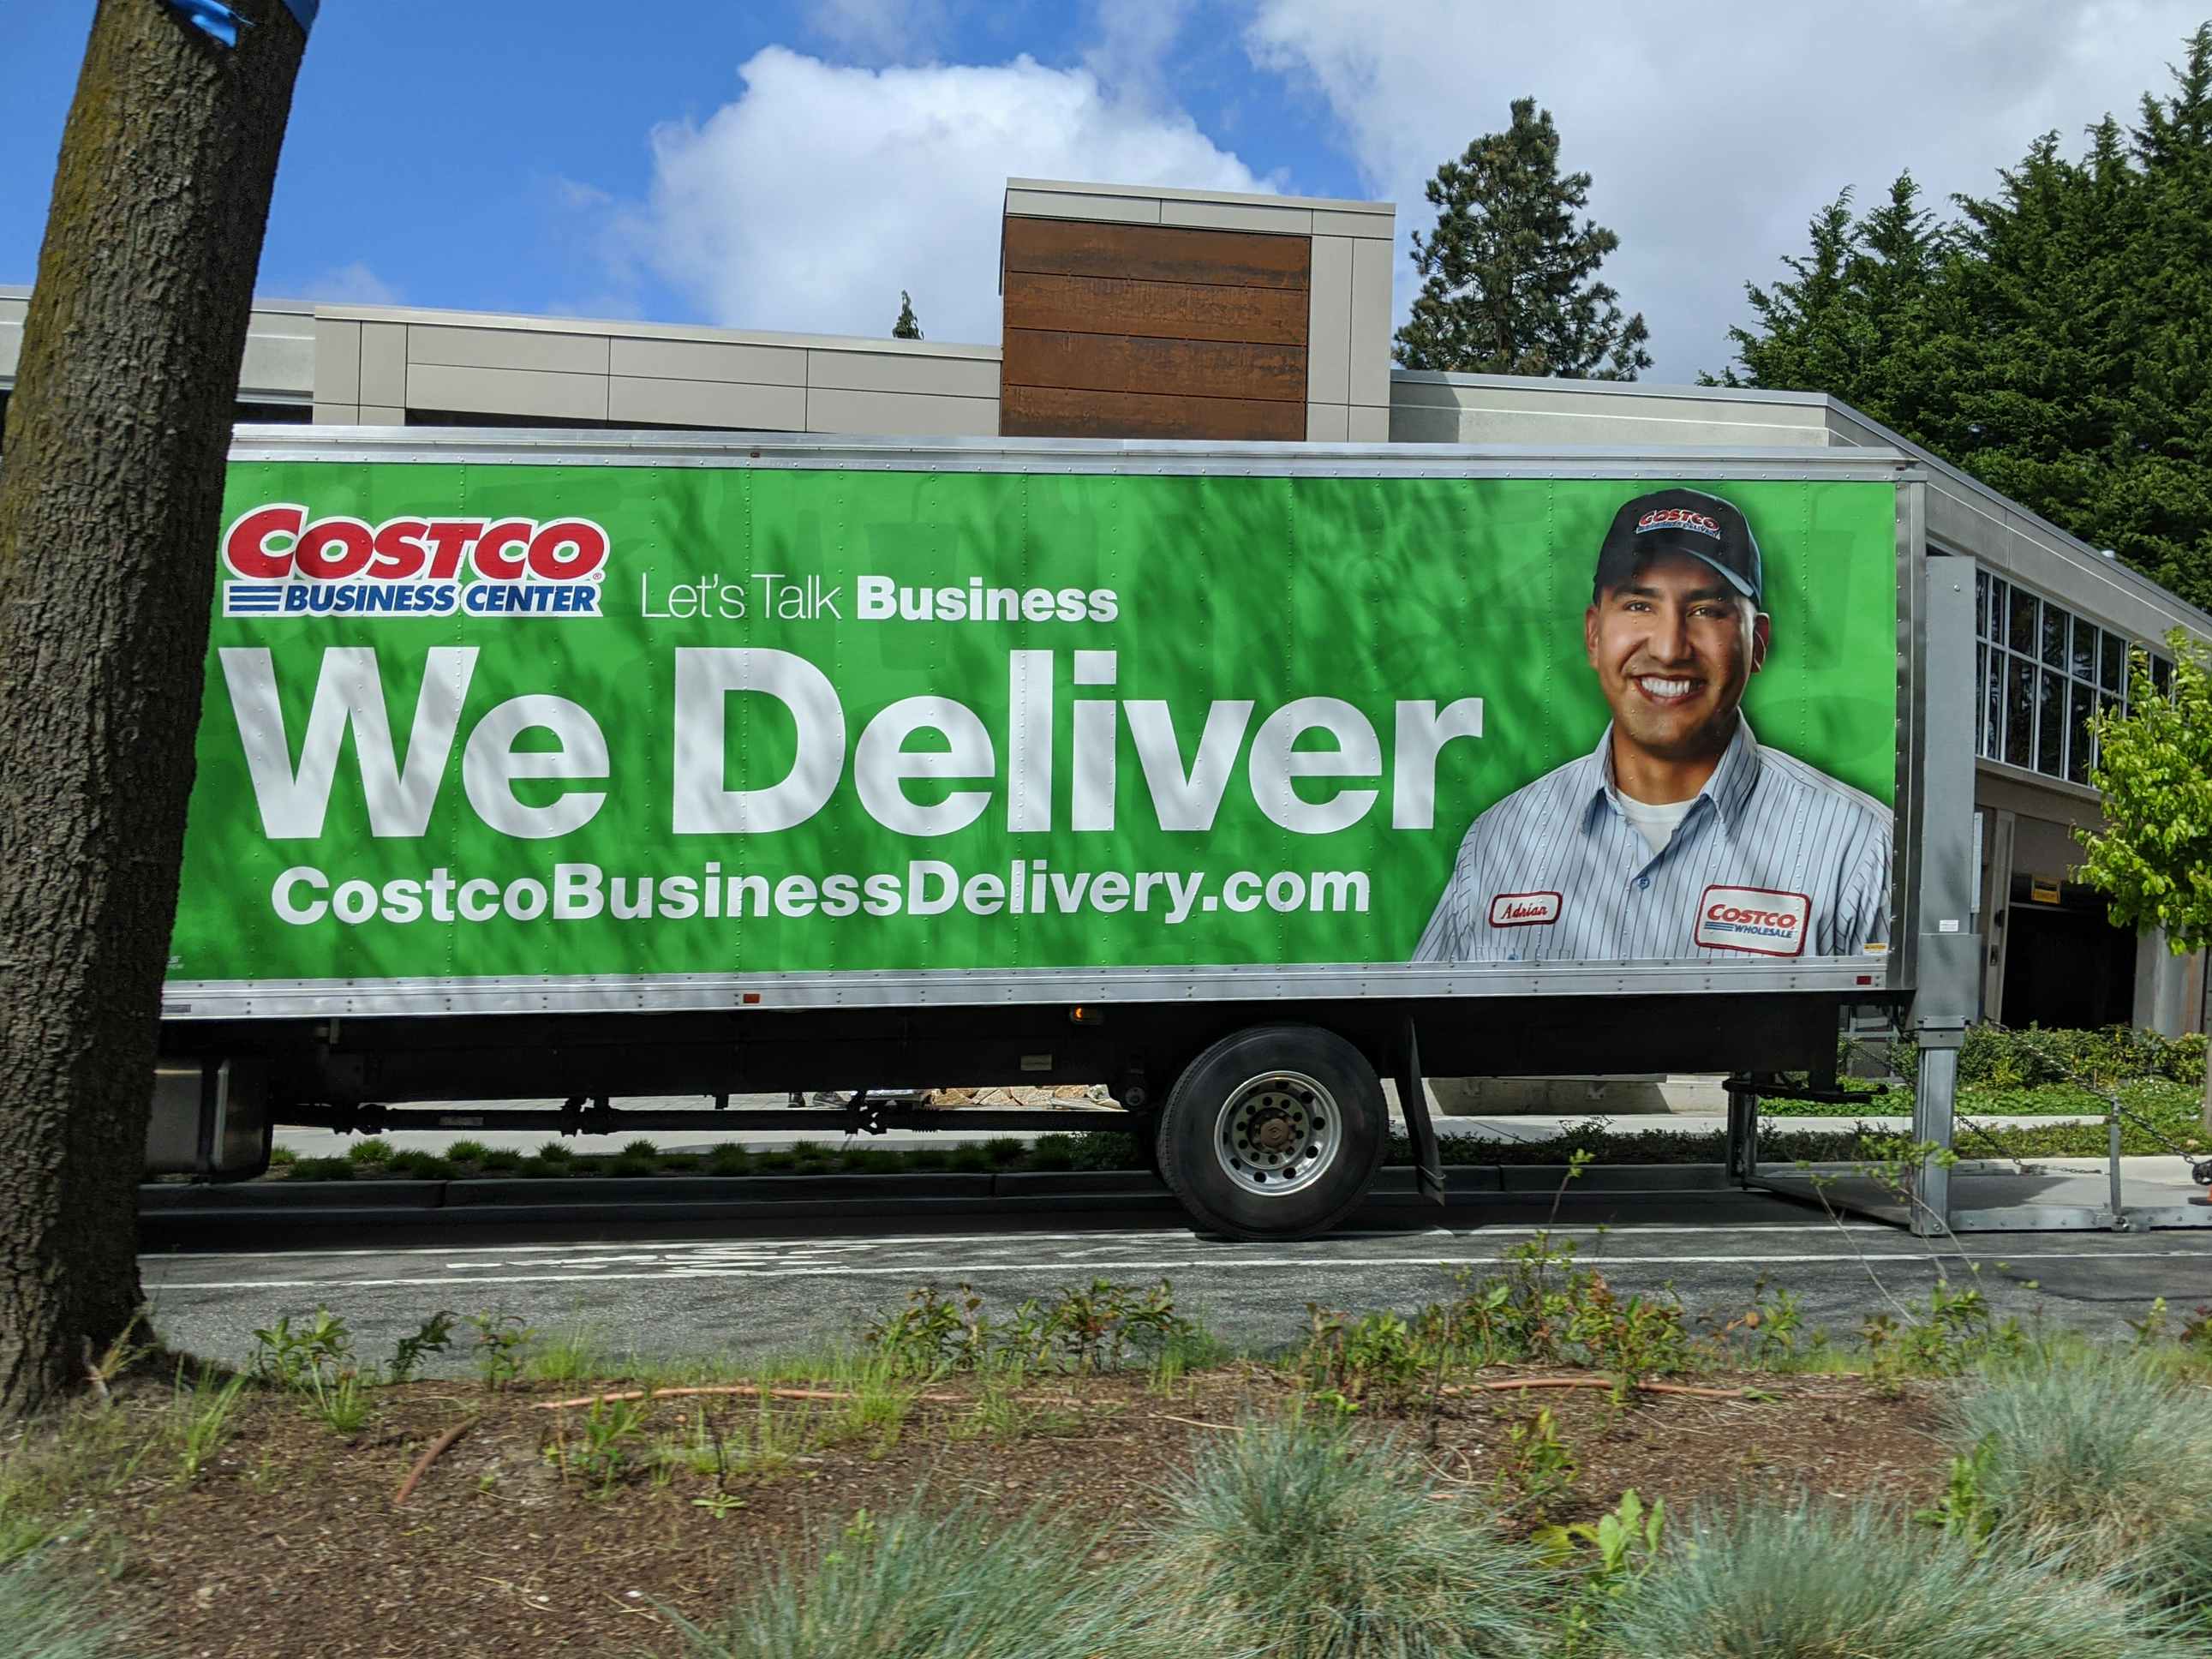 A Costco Business Center delivery truck parked outside its destination